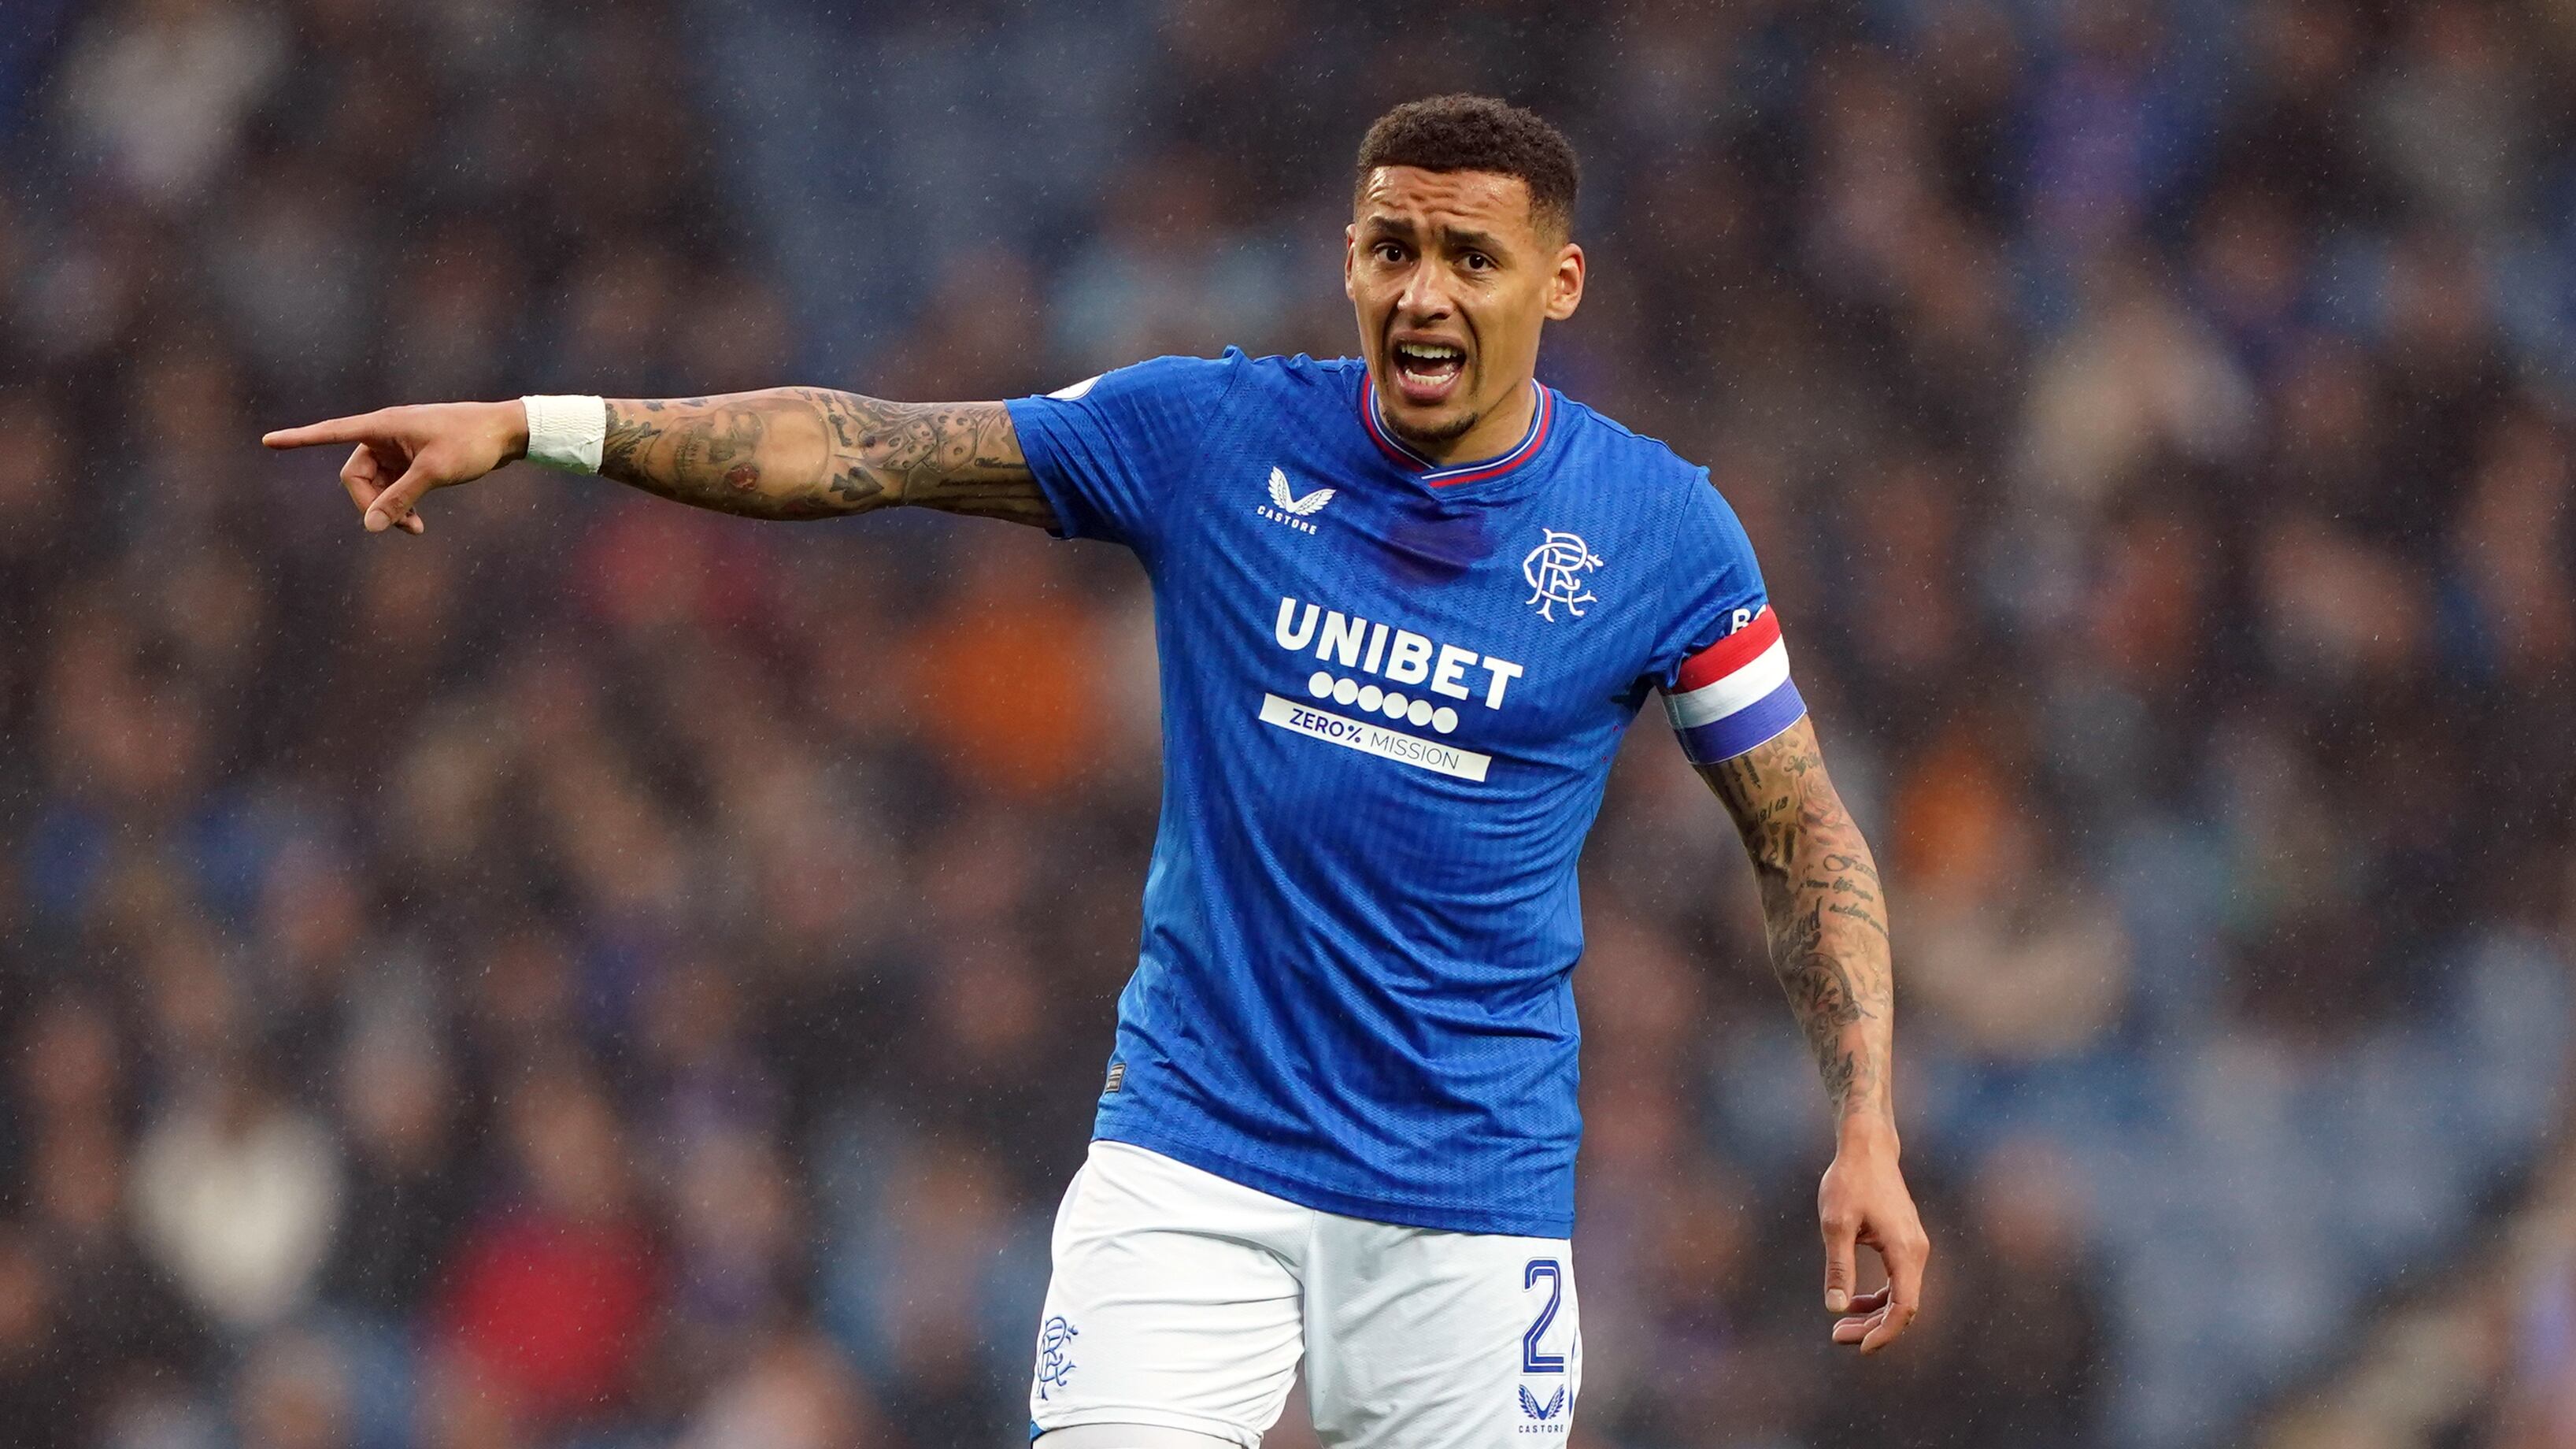 Rangers’ James Tavernier looking forward to cup final